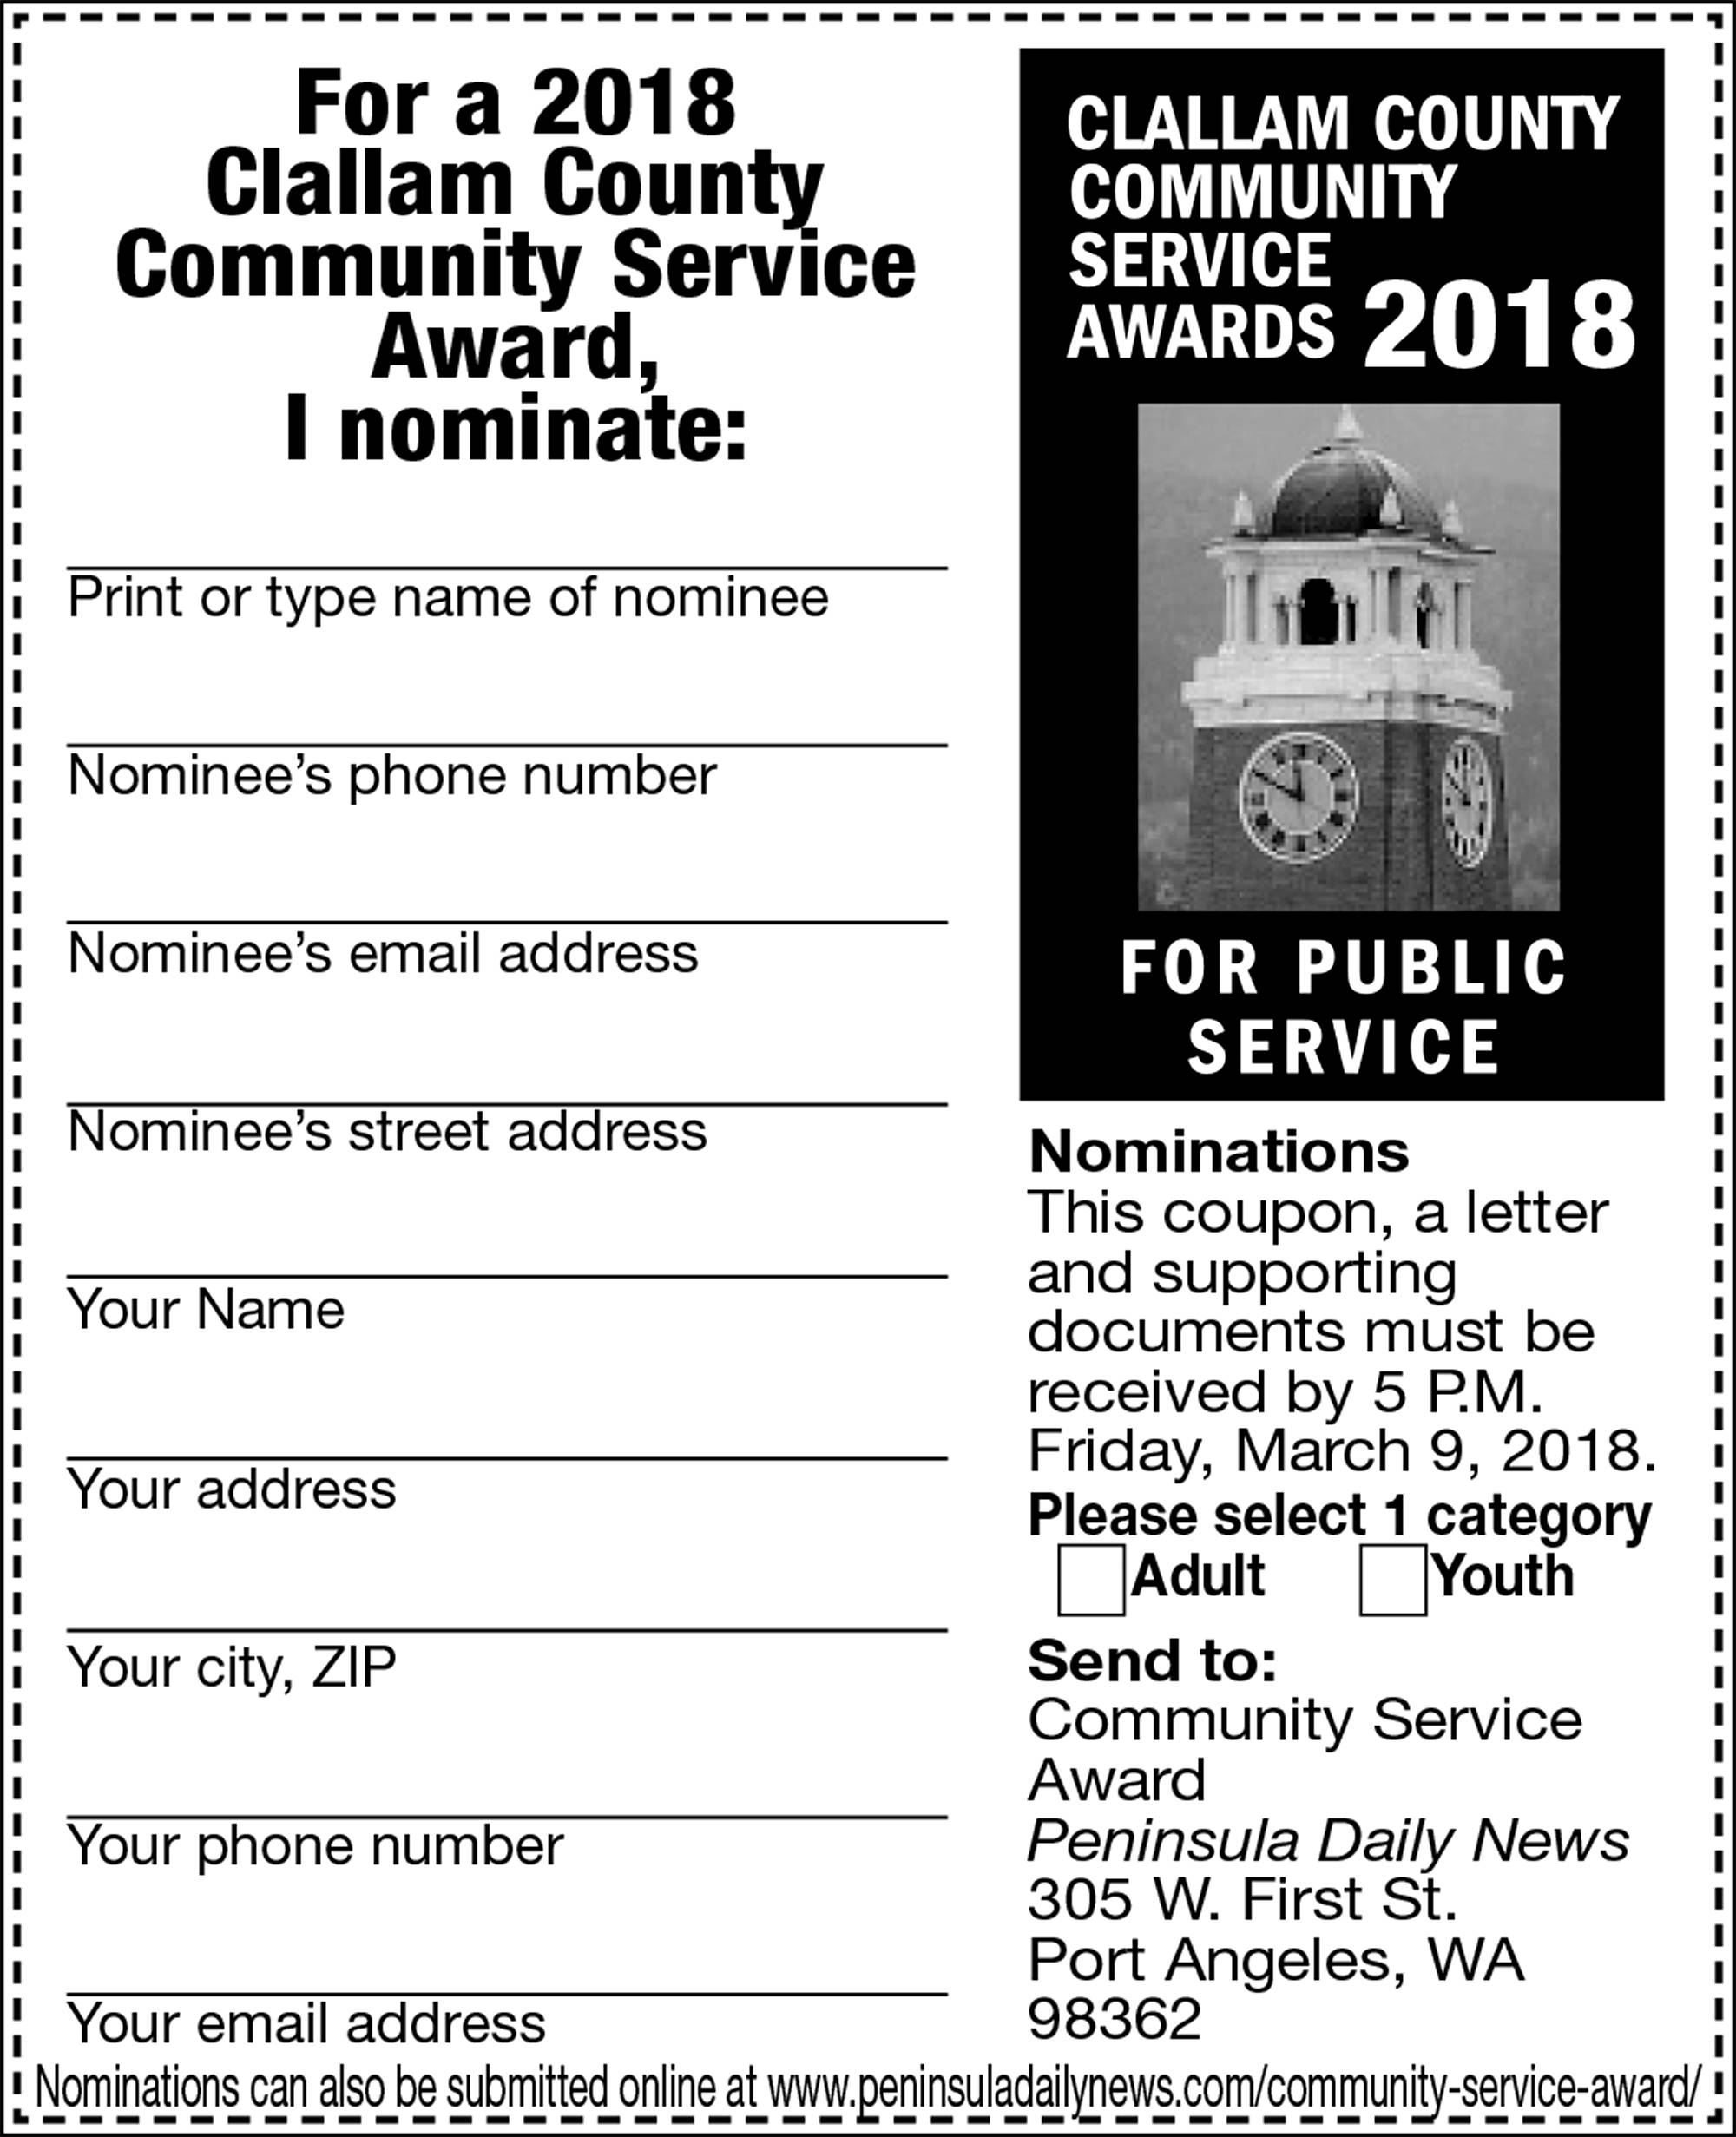 Deadline is Friday for Clallam County Community Service Award nominations